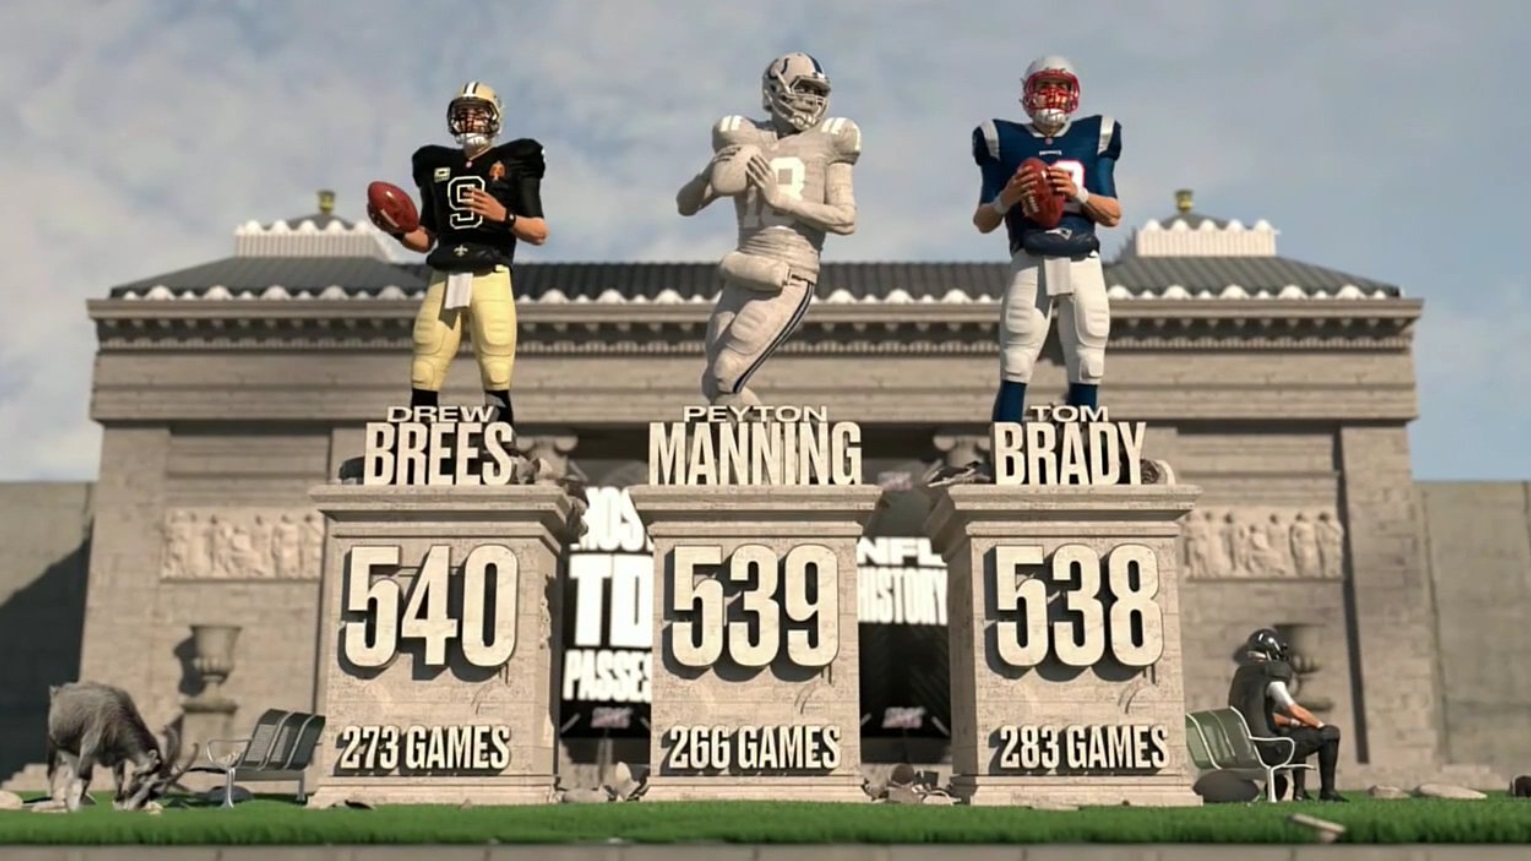 PHOTO Top 3 Leaders In Passing TDs In NFL History